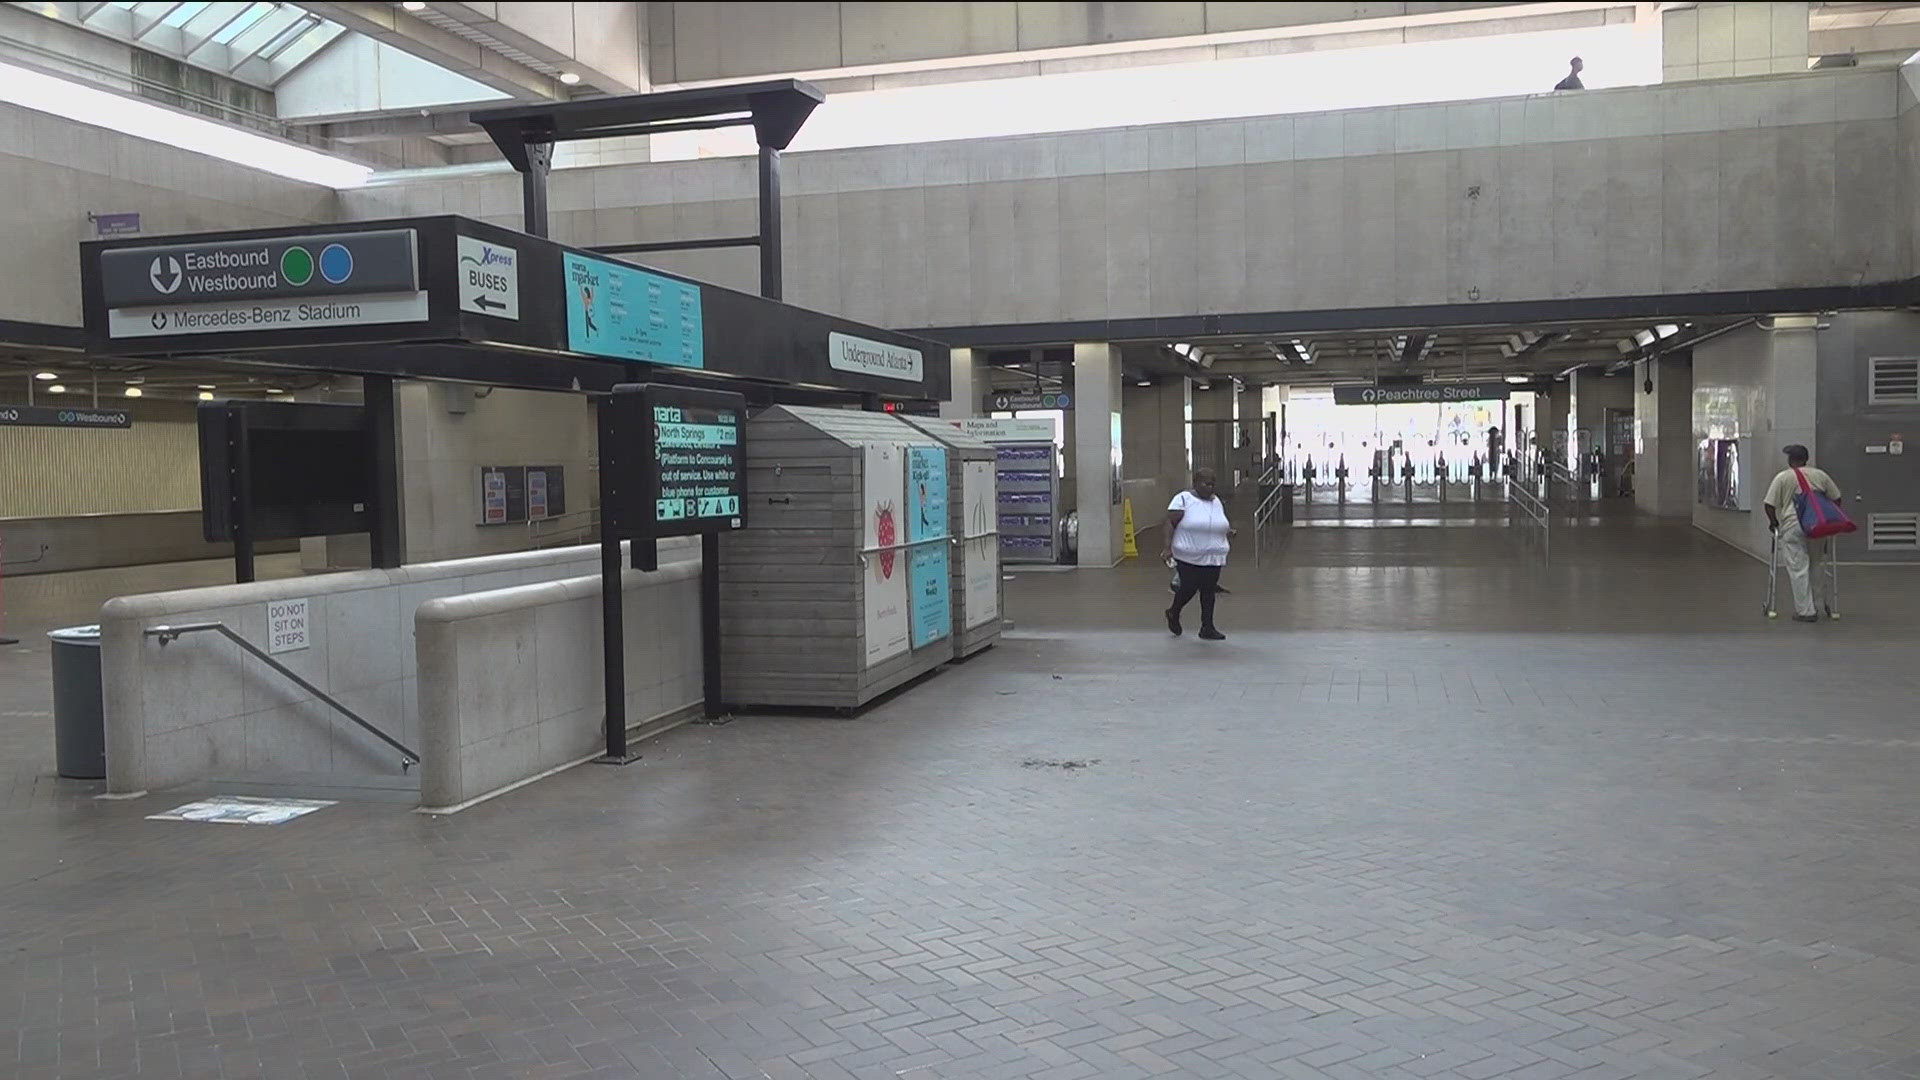 The transit authority says the closure will not last the entire four years of renovations